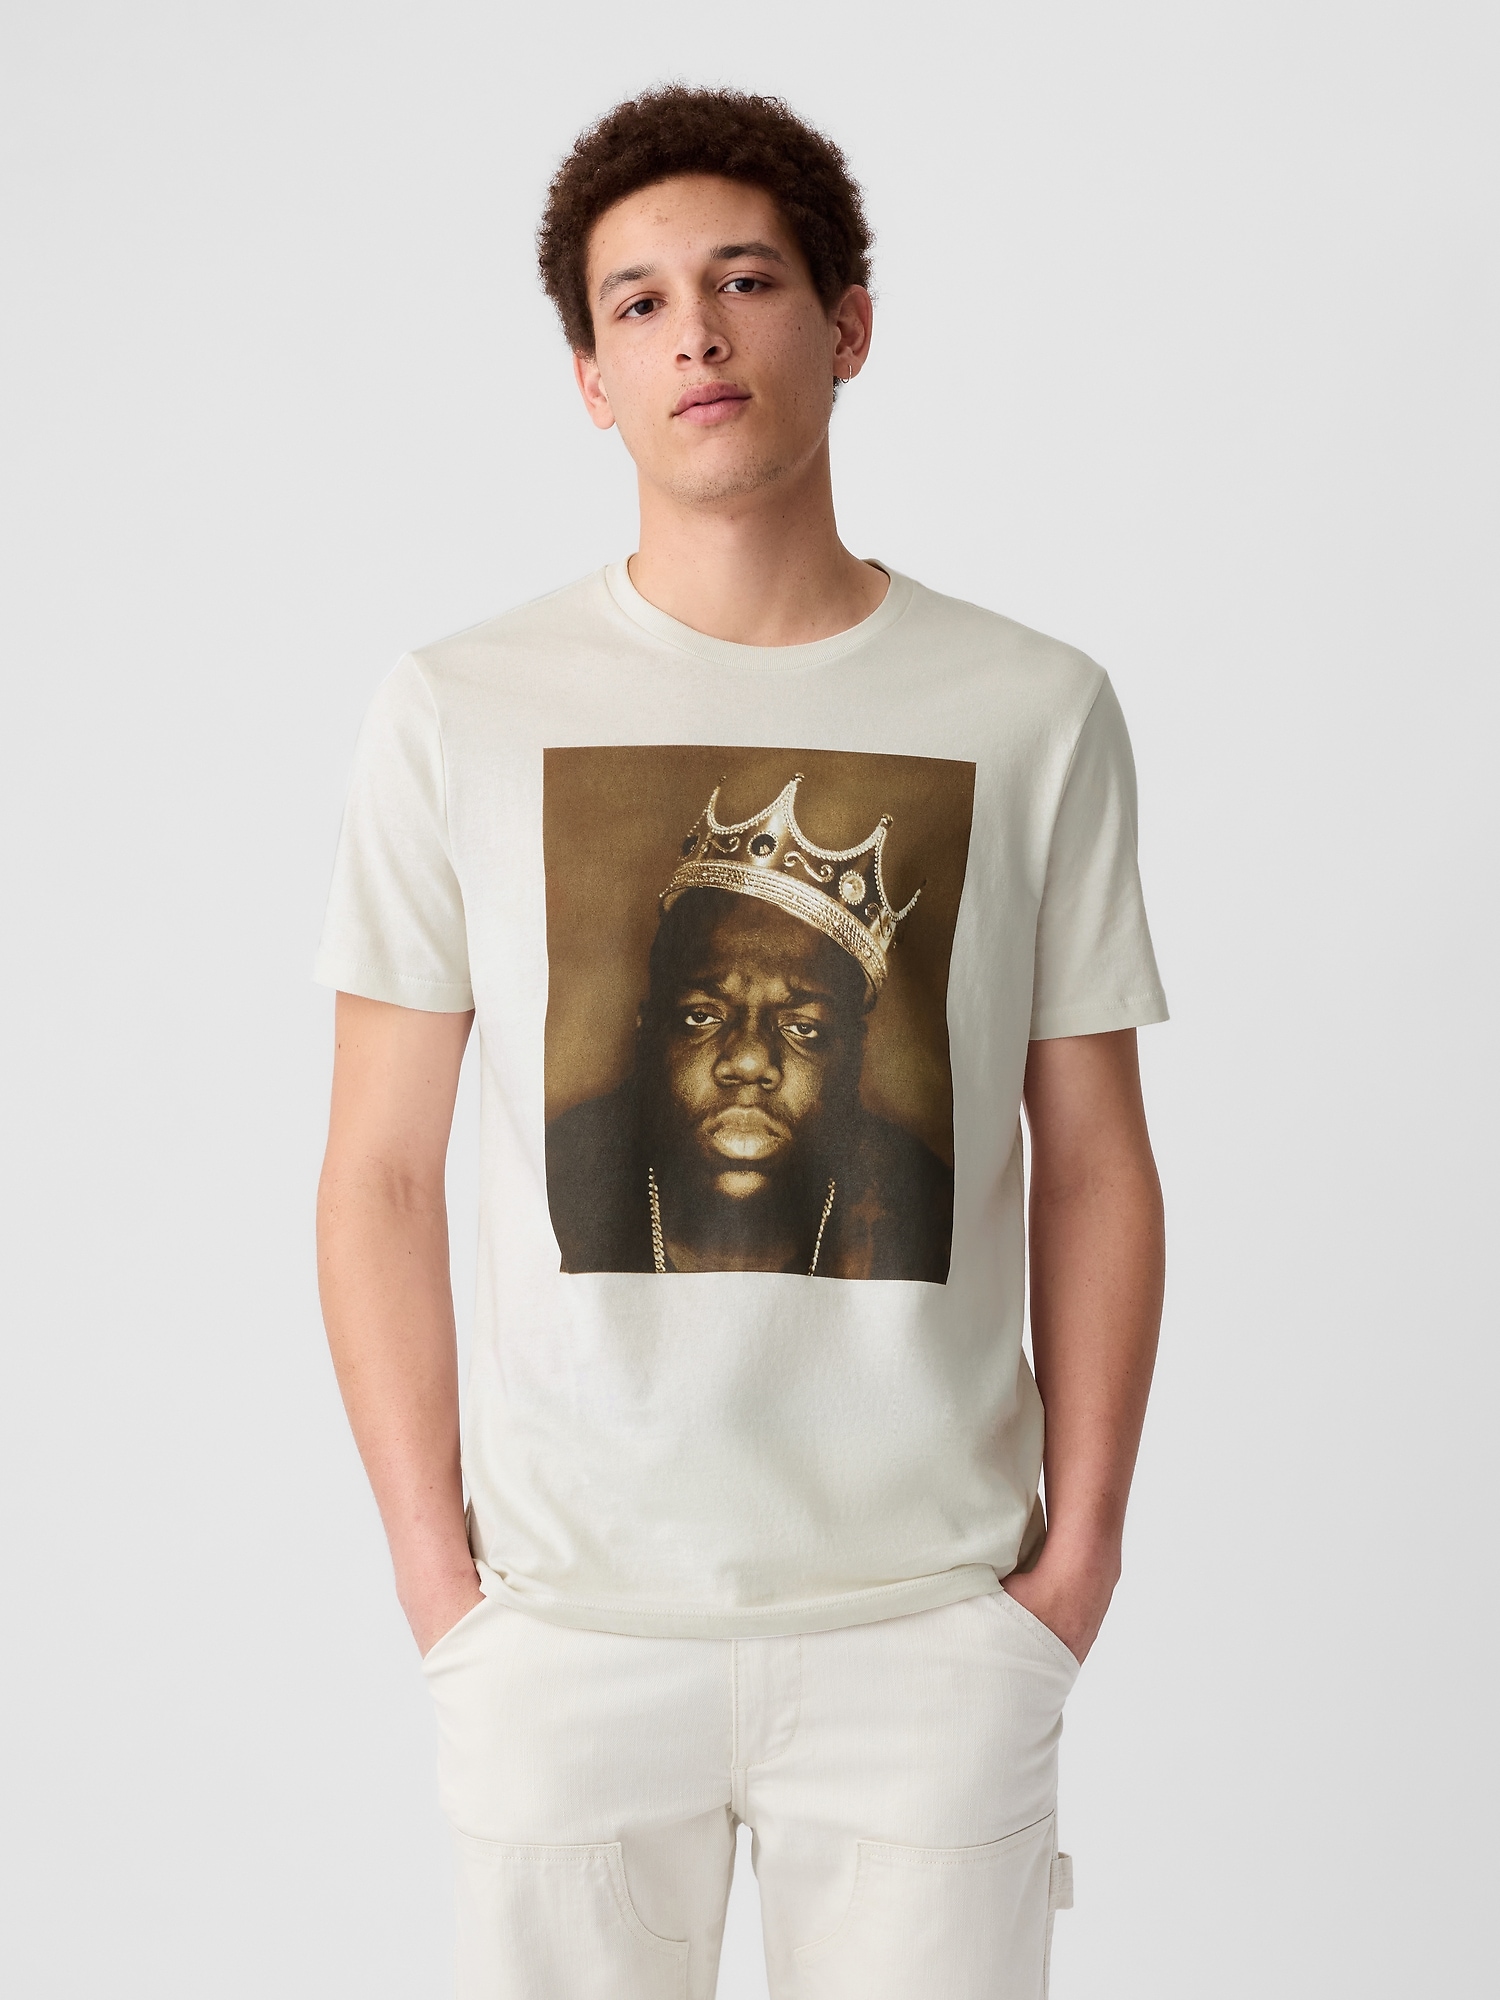 The Notorious B.I.G. Graphic T-Shirt